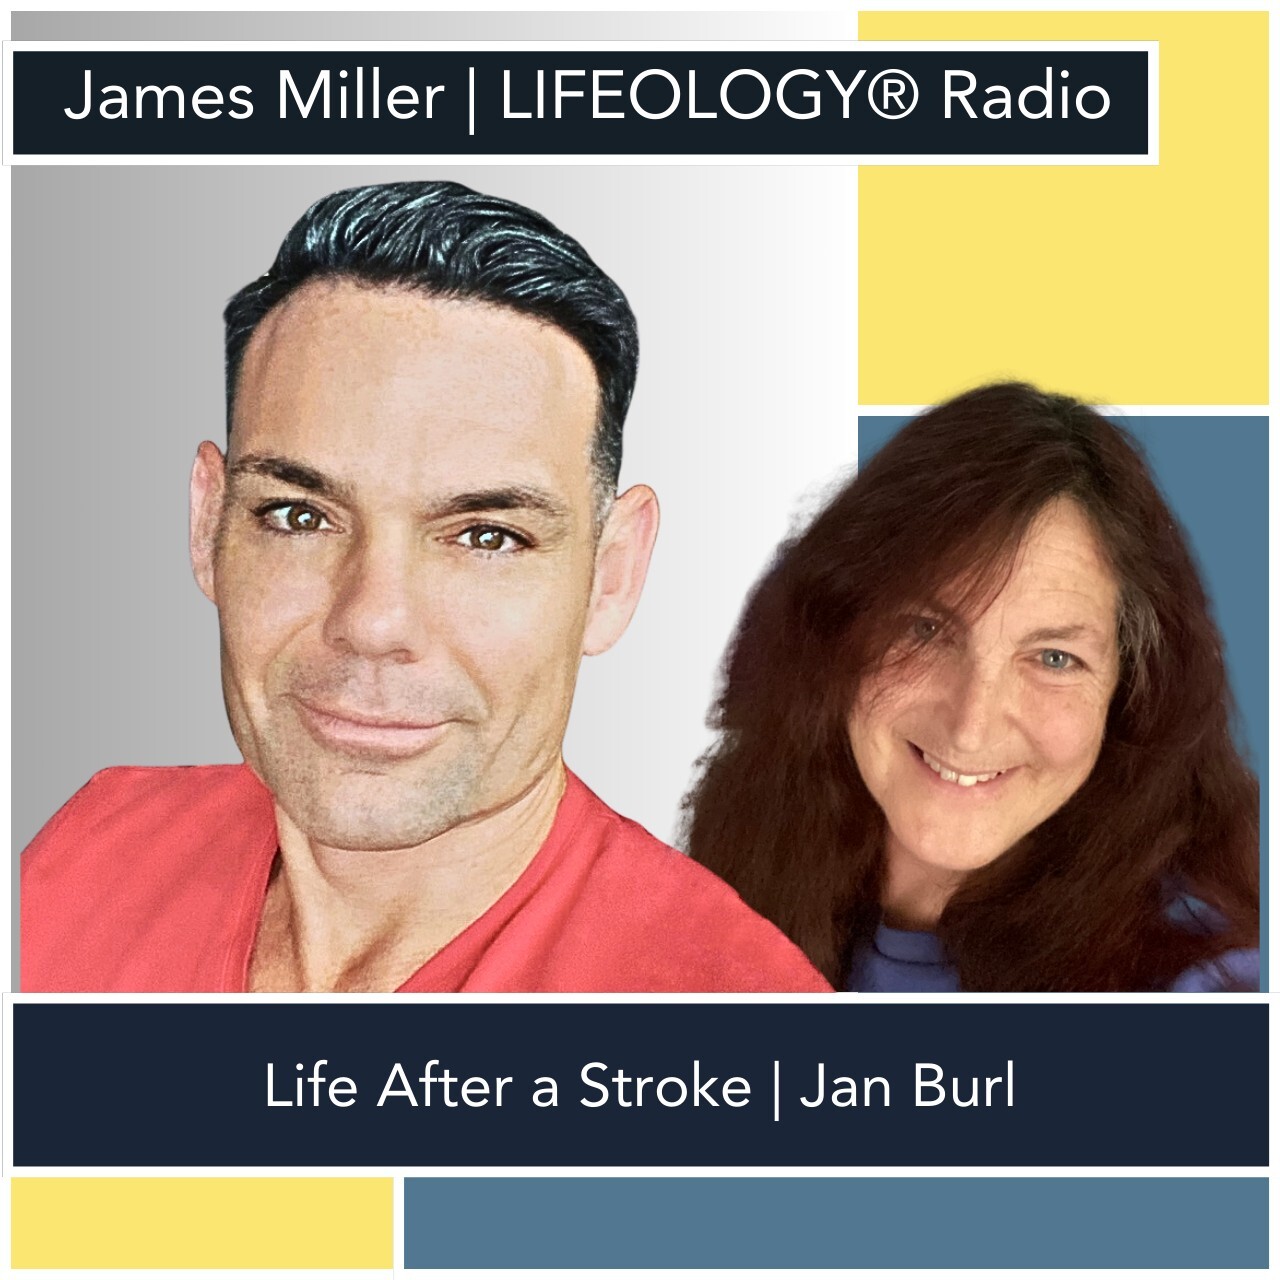 life after a stroke